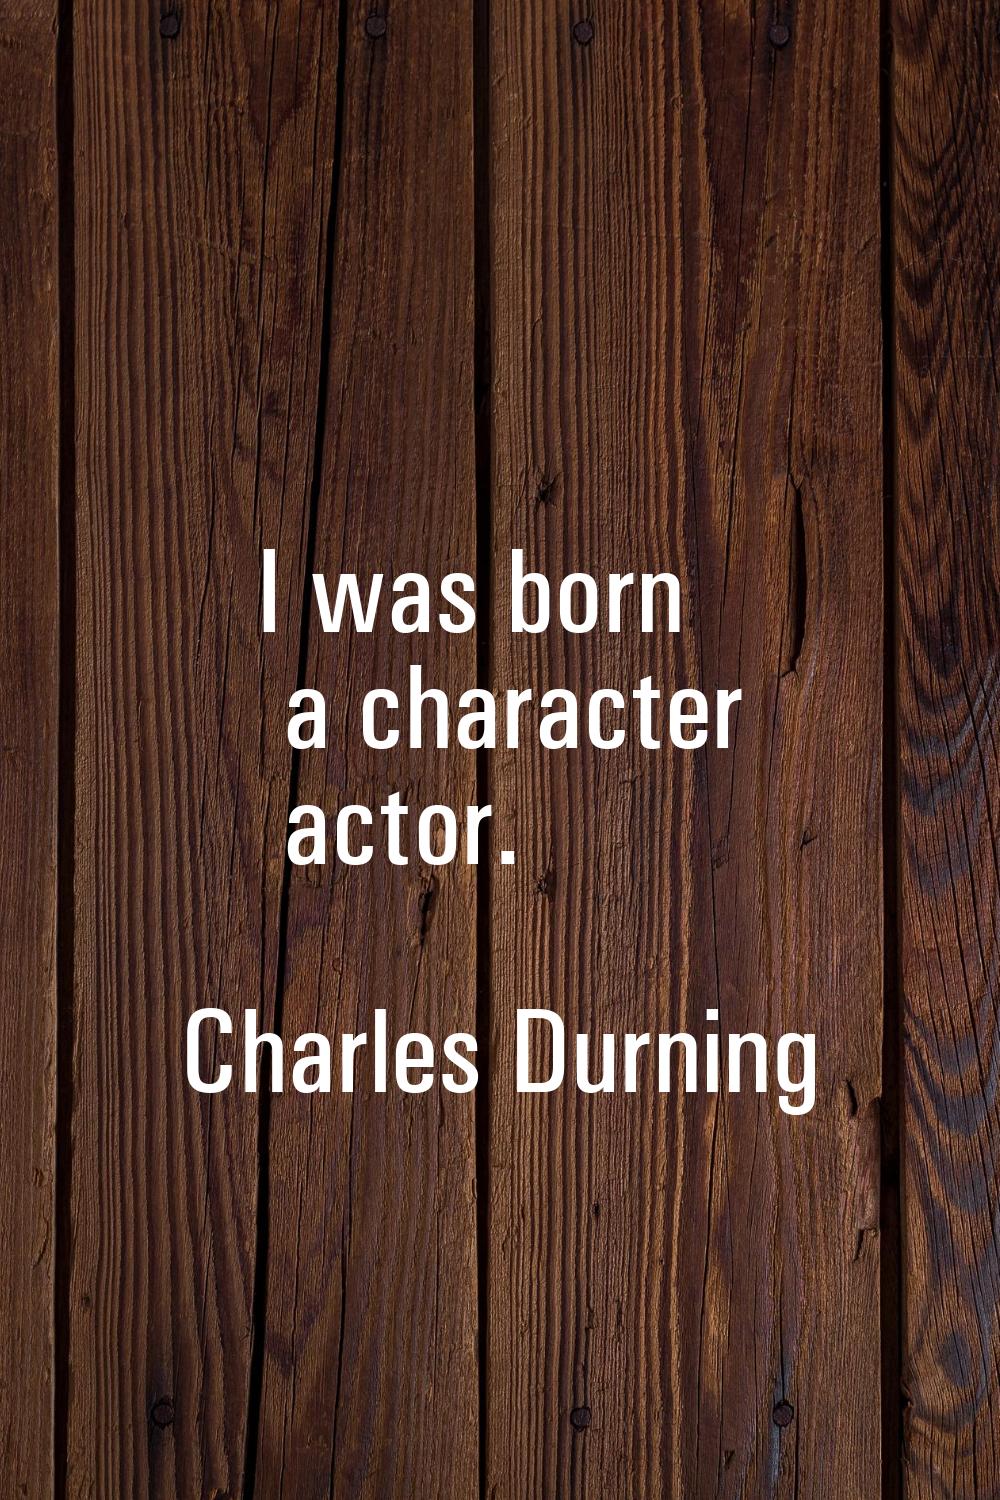 I was born a character actor.